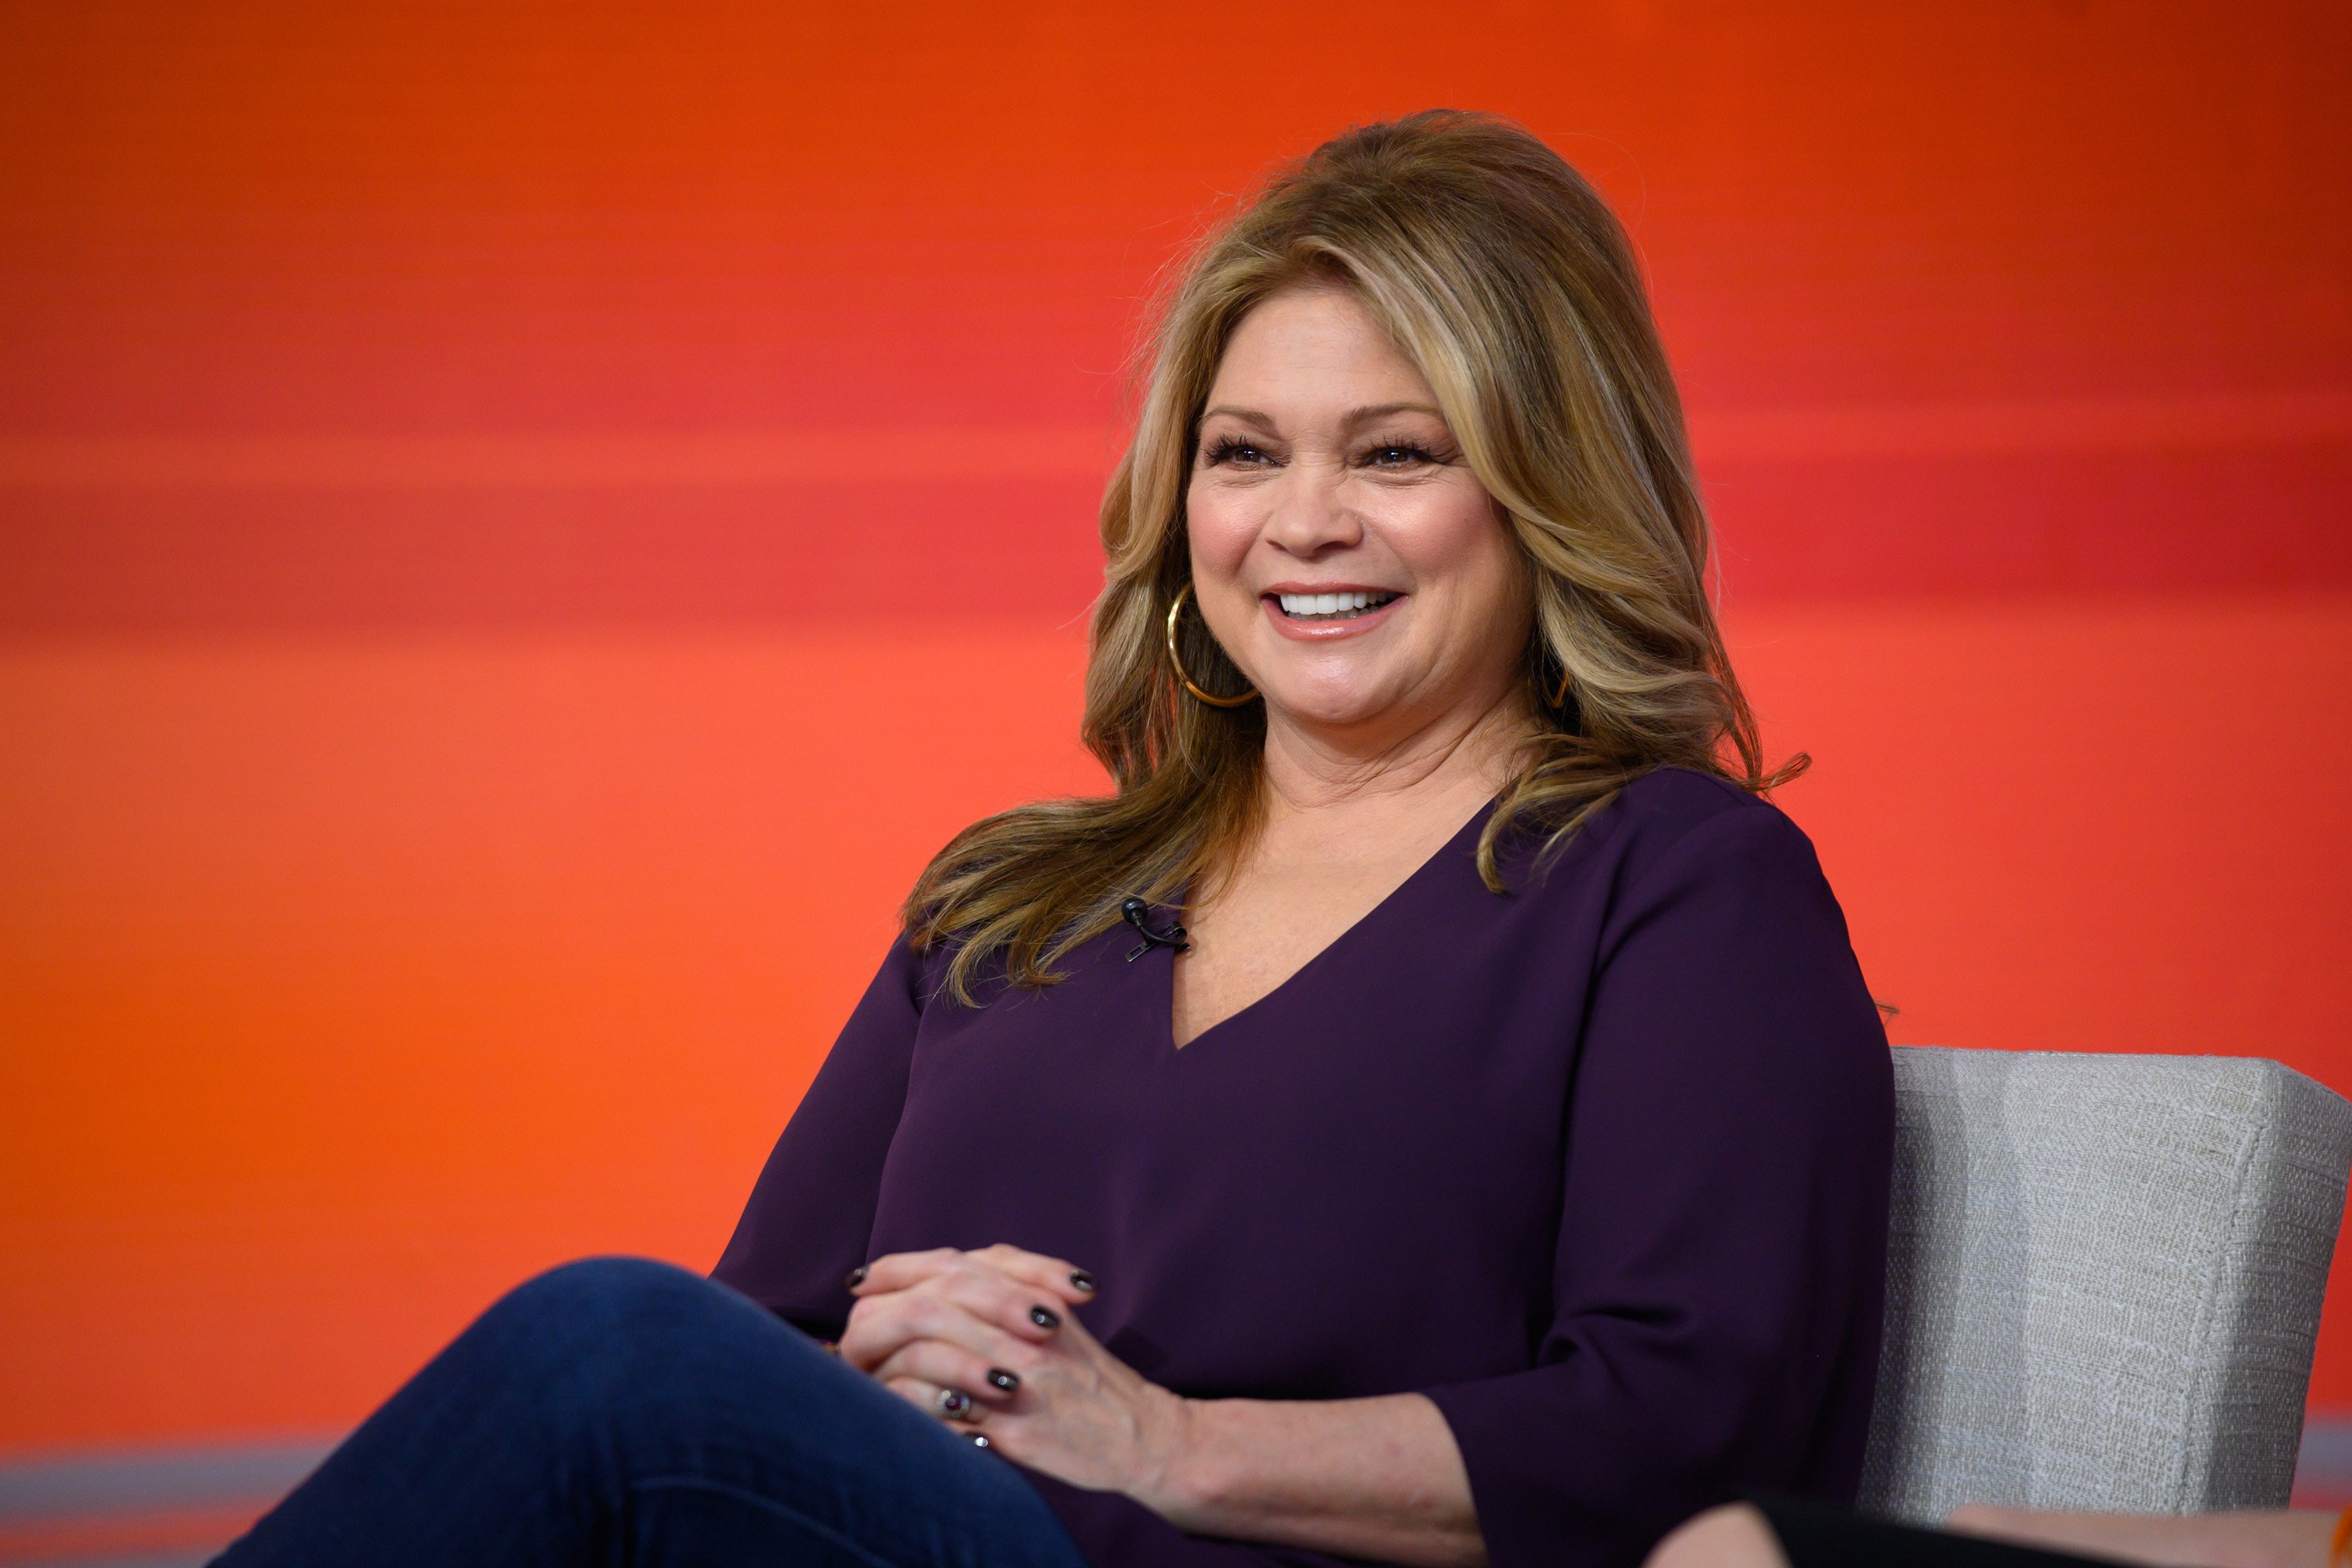 Food Network personality Valerie Bertinelli wears a long-sleeved, v-necked purple sweater in this photograph.